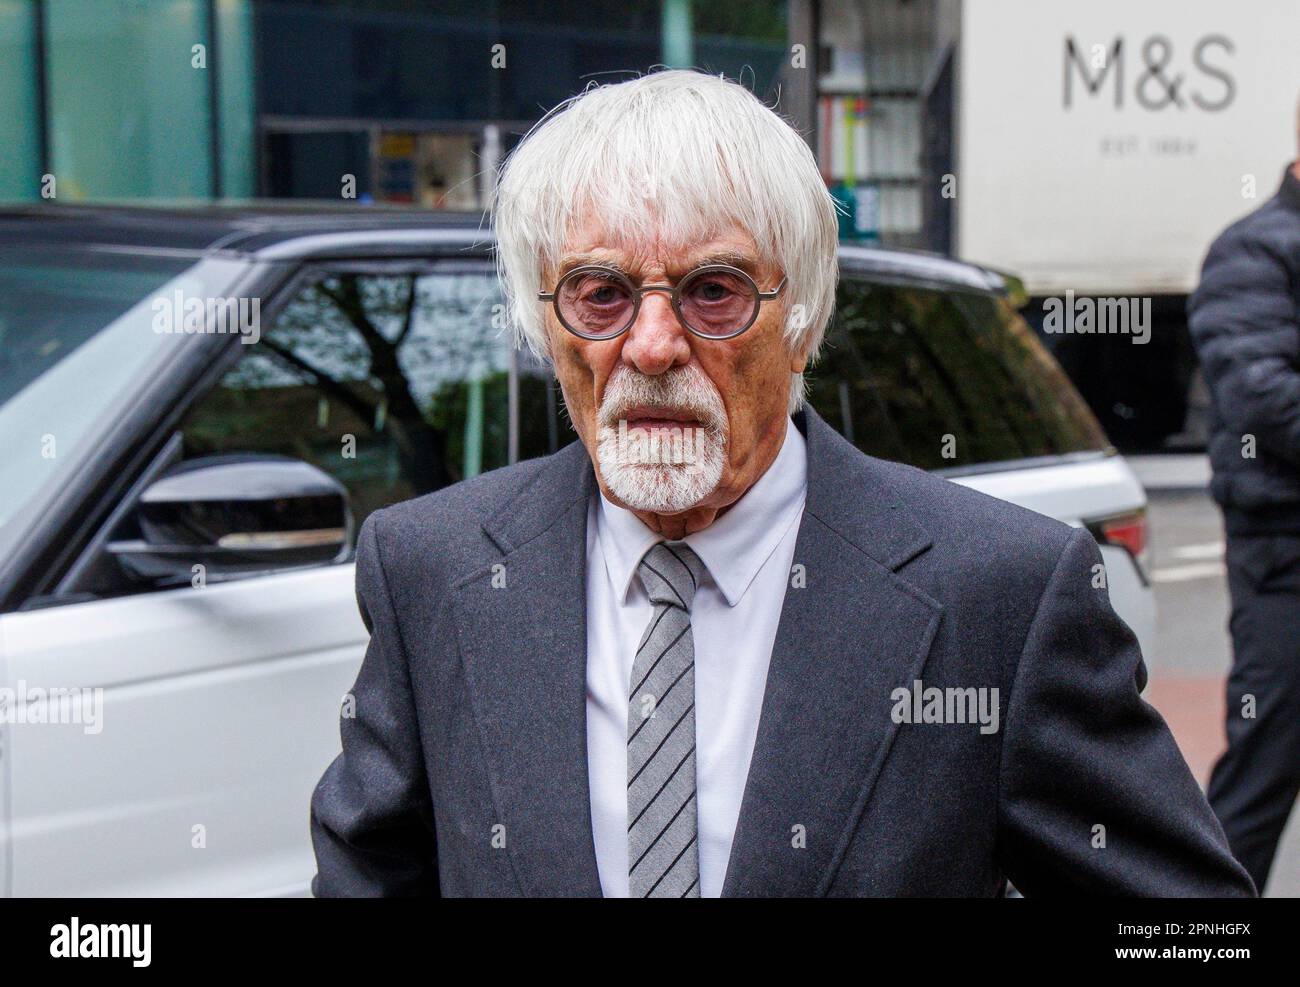 London, UK. 19th Apr, 2023. Former Formula One boss, Bernie Ecclestone, arrives at Southwark Crown Court. He is accused of failing to declare £400 Million Pounds of assets. He is due to appear again in court in November. Credit: Karl Black/Alamy Live News Stock Photo